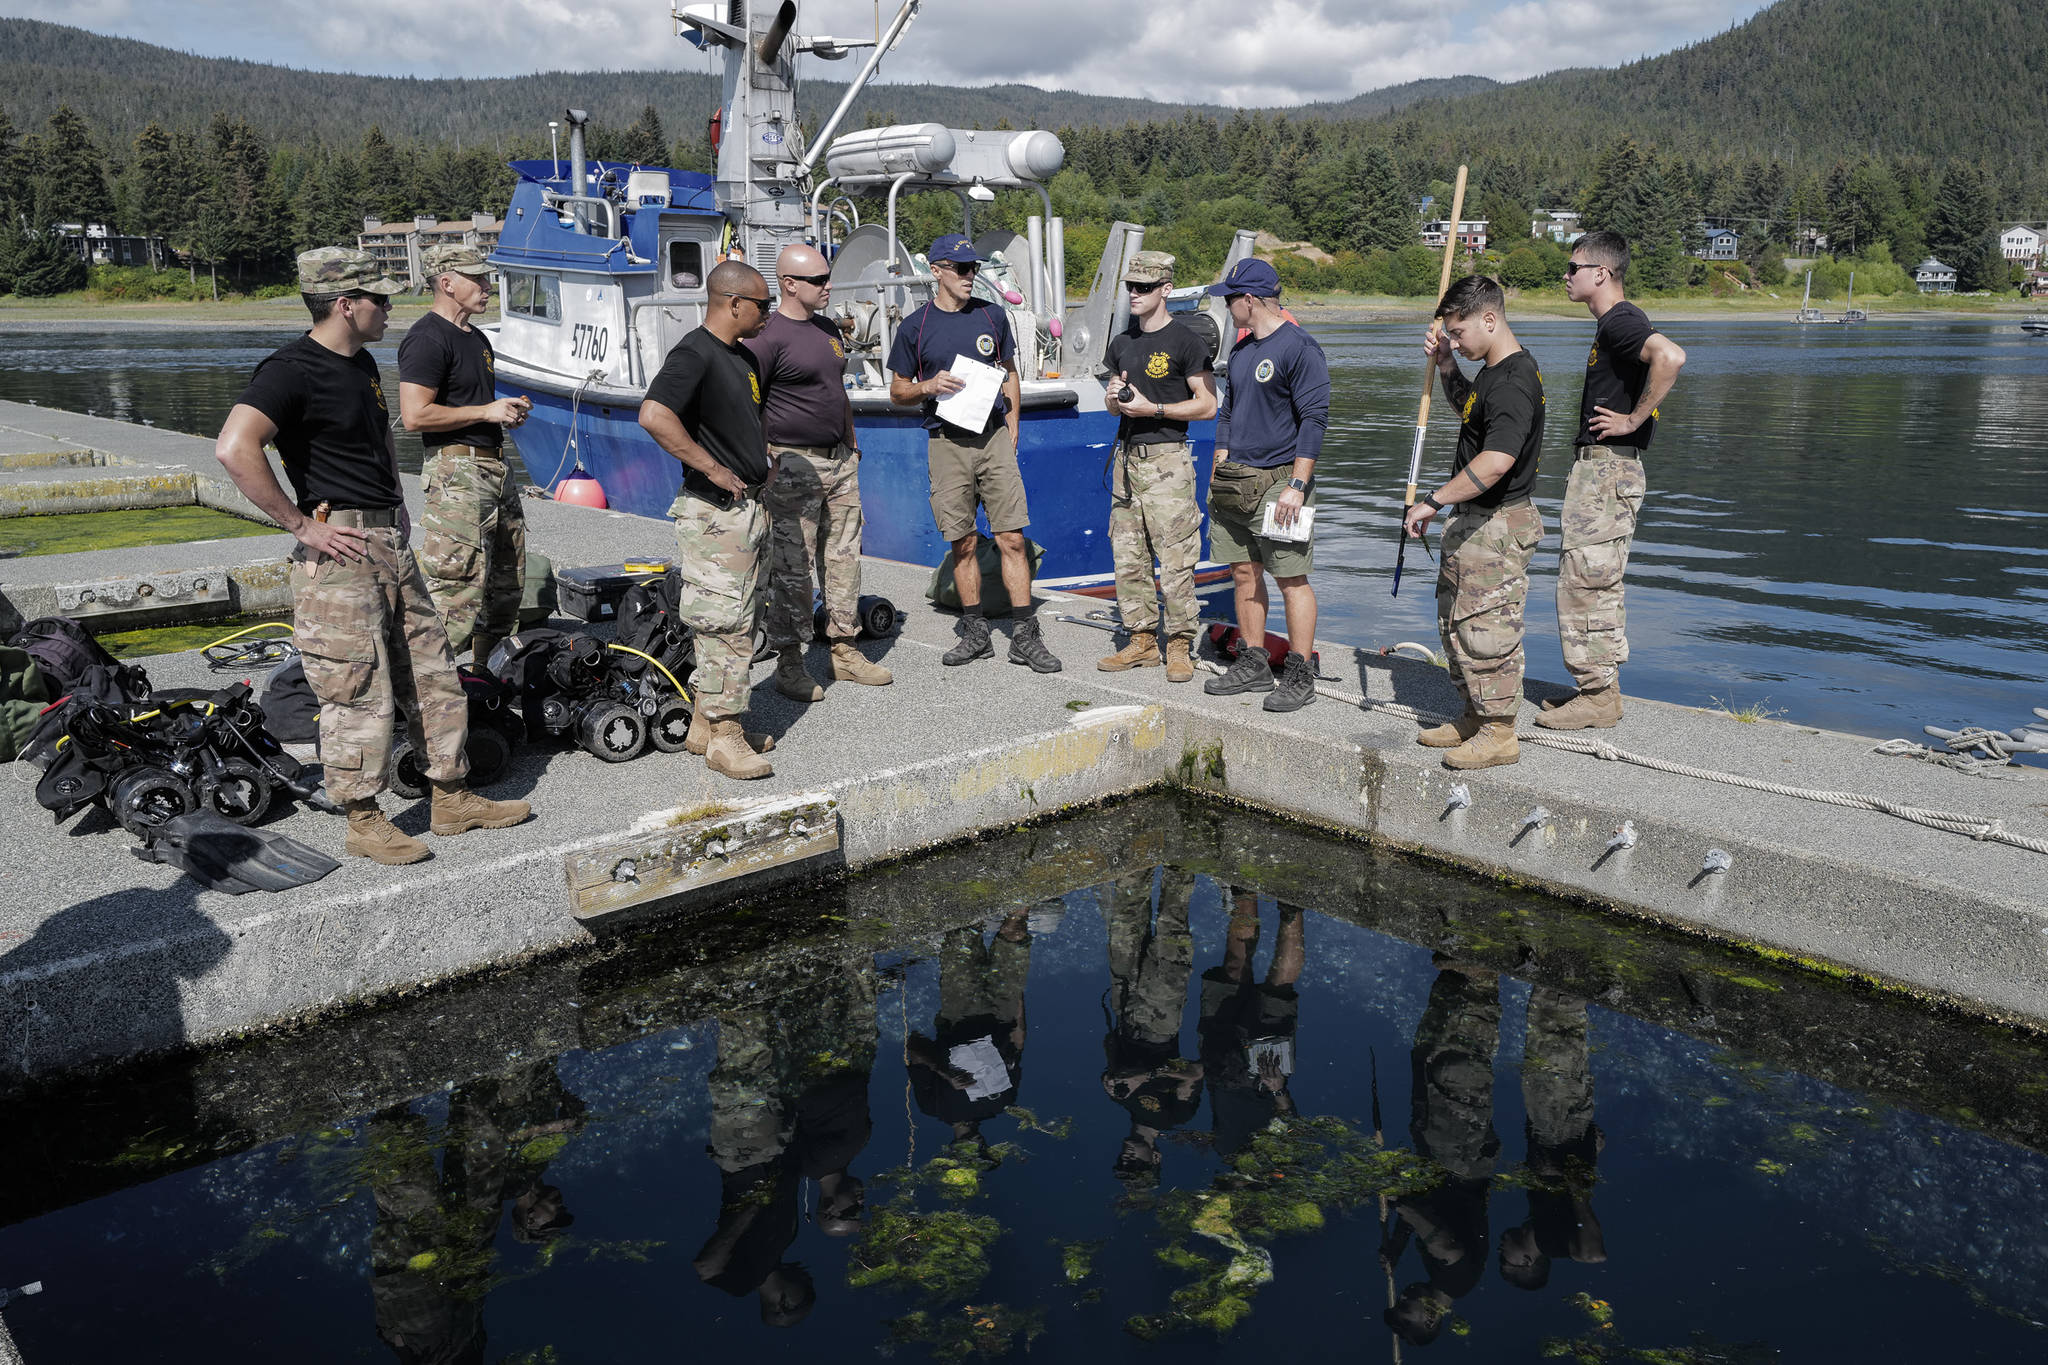 Members of the U.S. Army’s 74th Engineer Dive Detachment work with U.S. Coast Guard Regional Dive Locker West members on a project at the Don D. Statter Boat Harbor in Auke Bay on Friday, Aug. 16, 2019. The teams were working together to inspect and replace rusted bolts holding the harbor’s breakwater together. (Michael Penn | Juneau Empire)